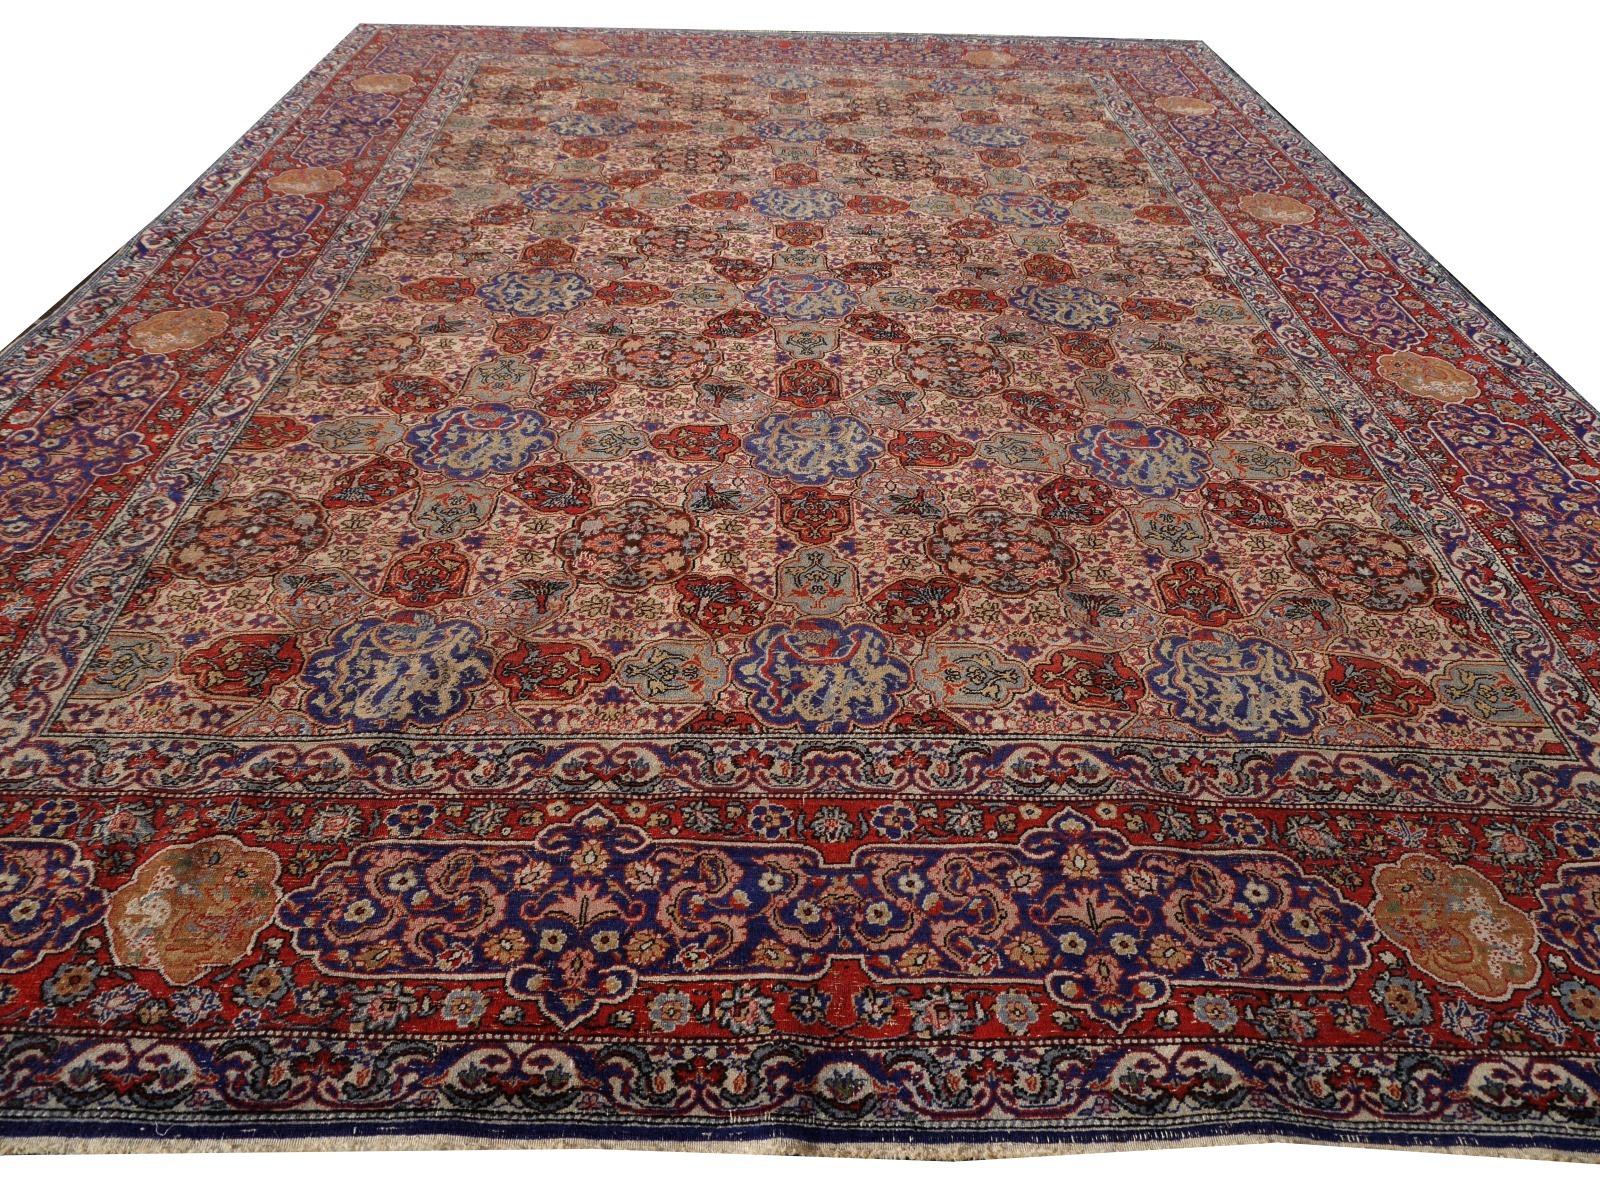 Antique Dragon Rug Hand Knotted in Hereke Turkish Carpet In Good Condition For Sale In Lohr, Bavaria, DE